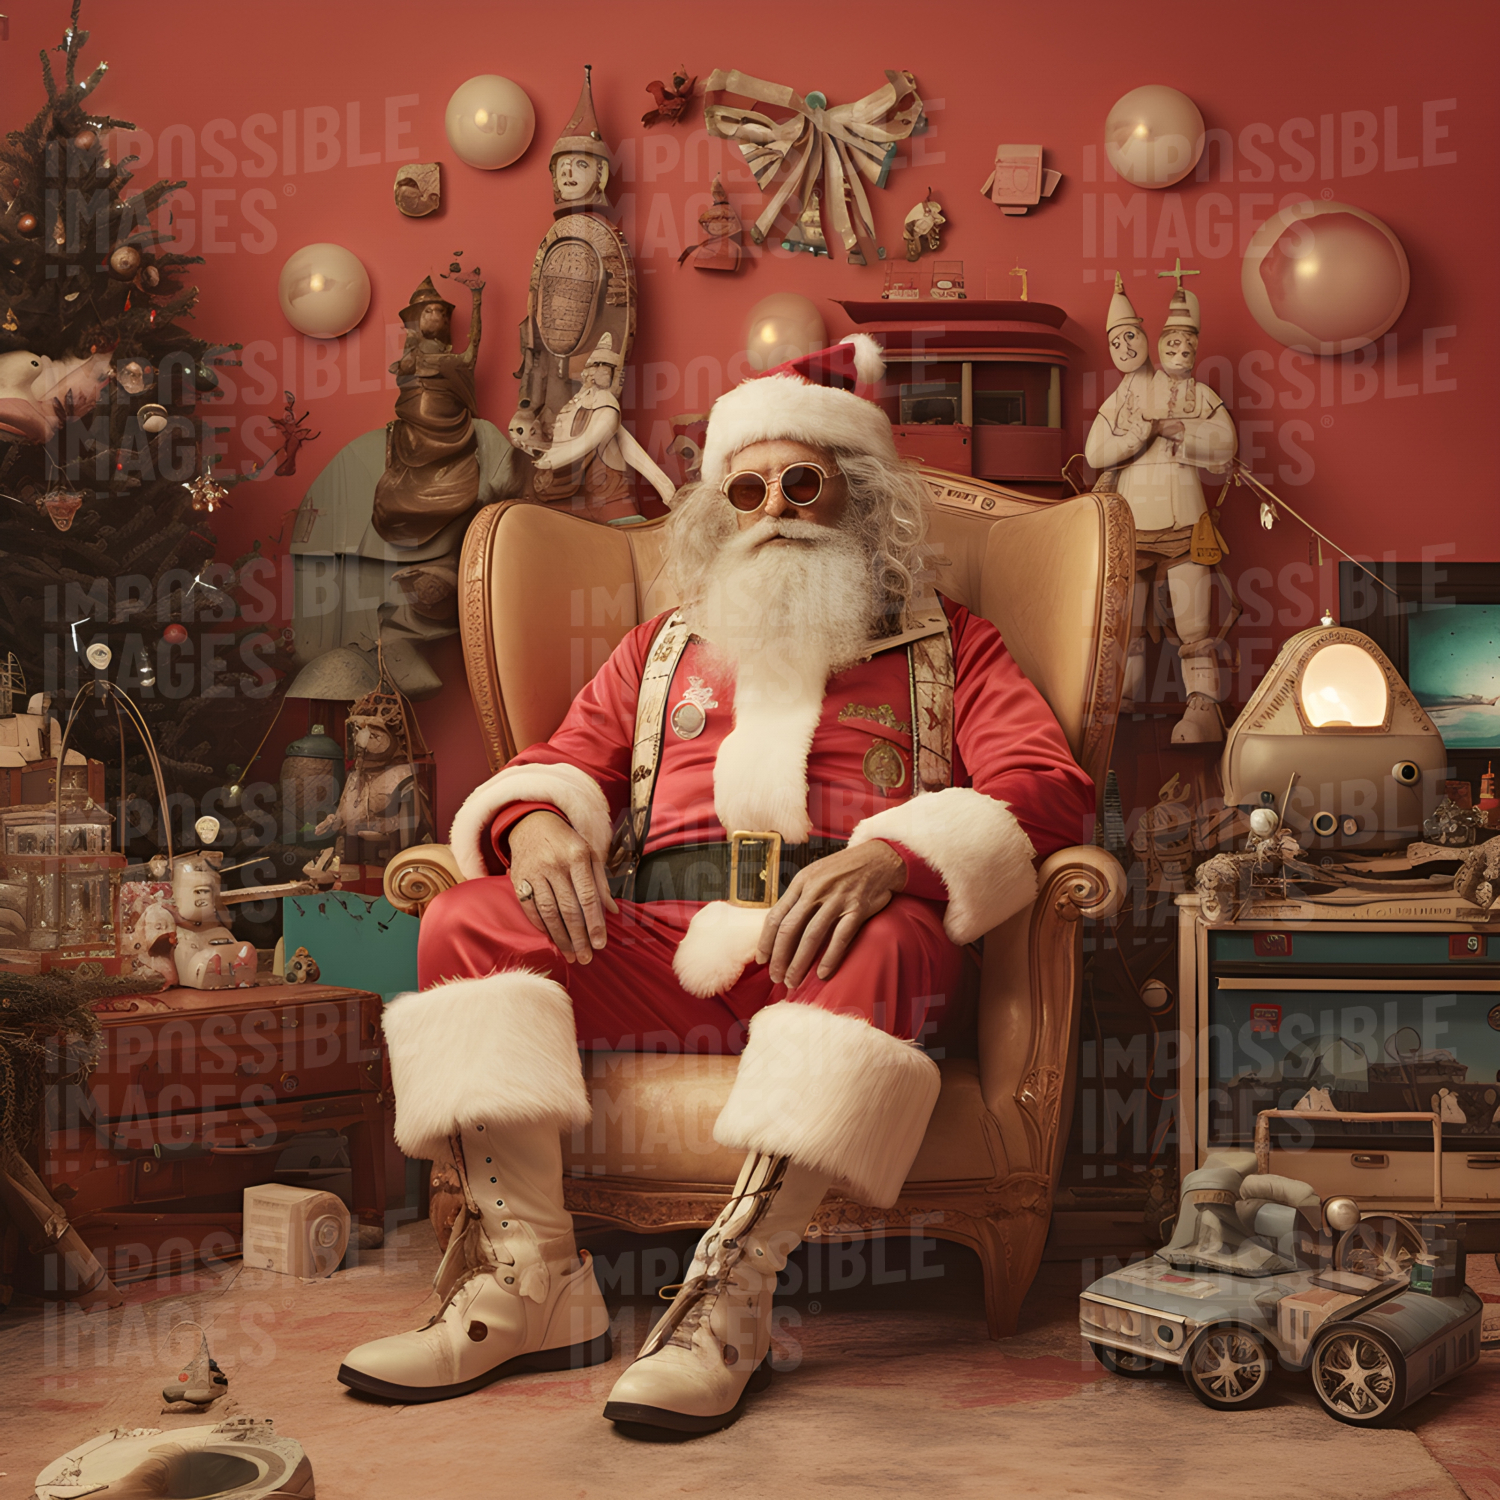 Aesthetic santa -  A Santa Claus figure with an emphasis on beauty and style, rather than traditional Christmas decorations.